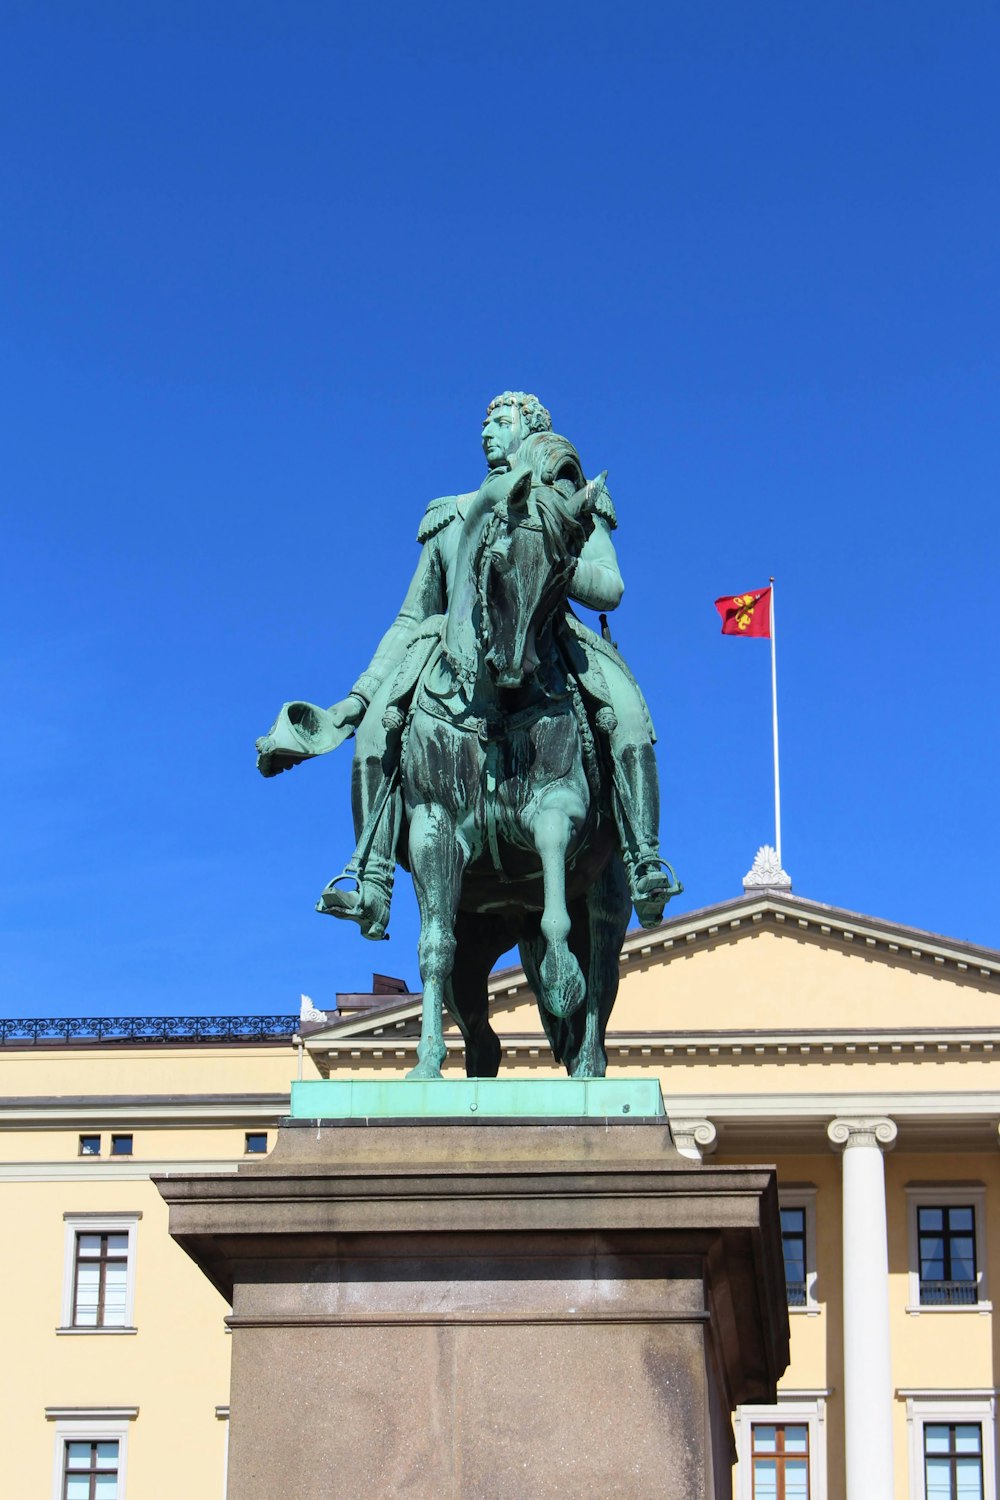 a statue of a person on a horse